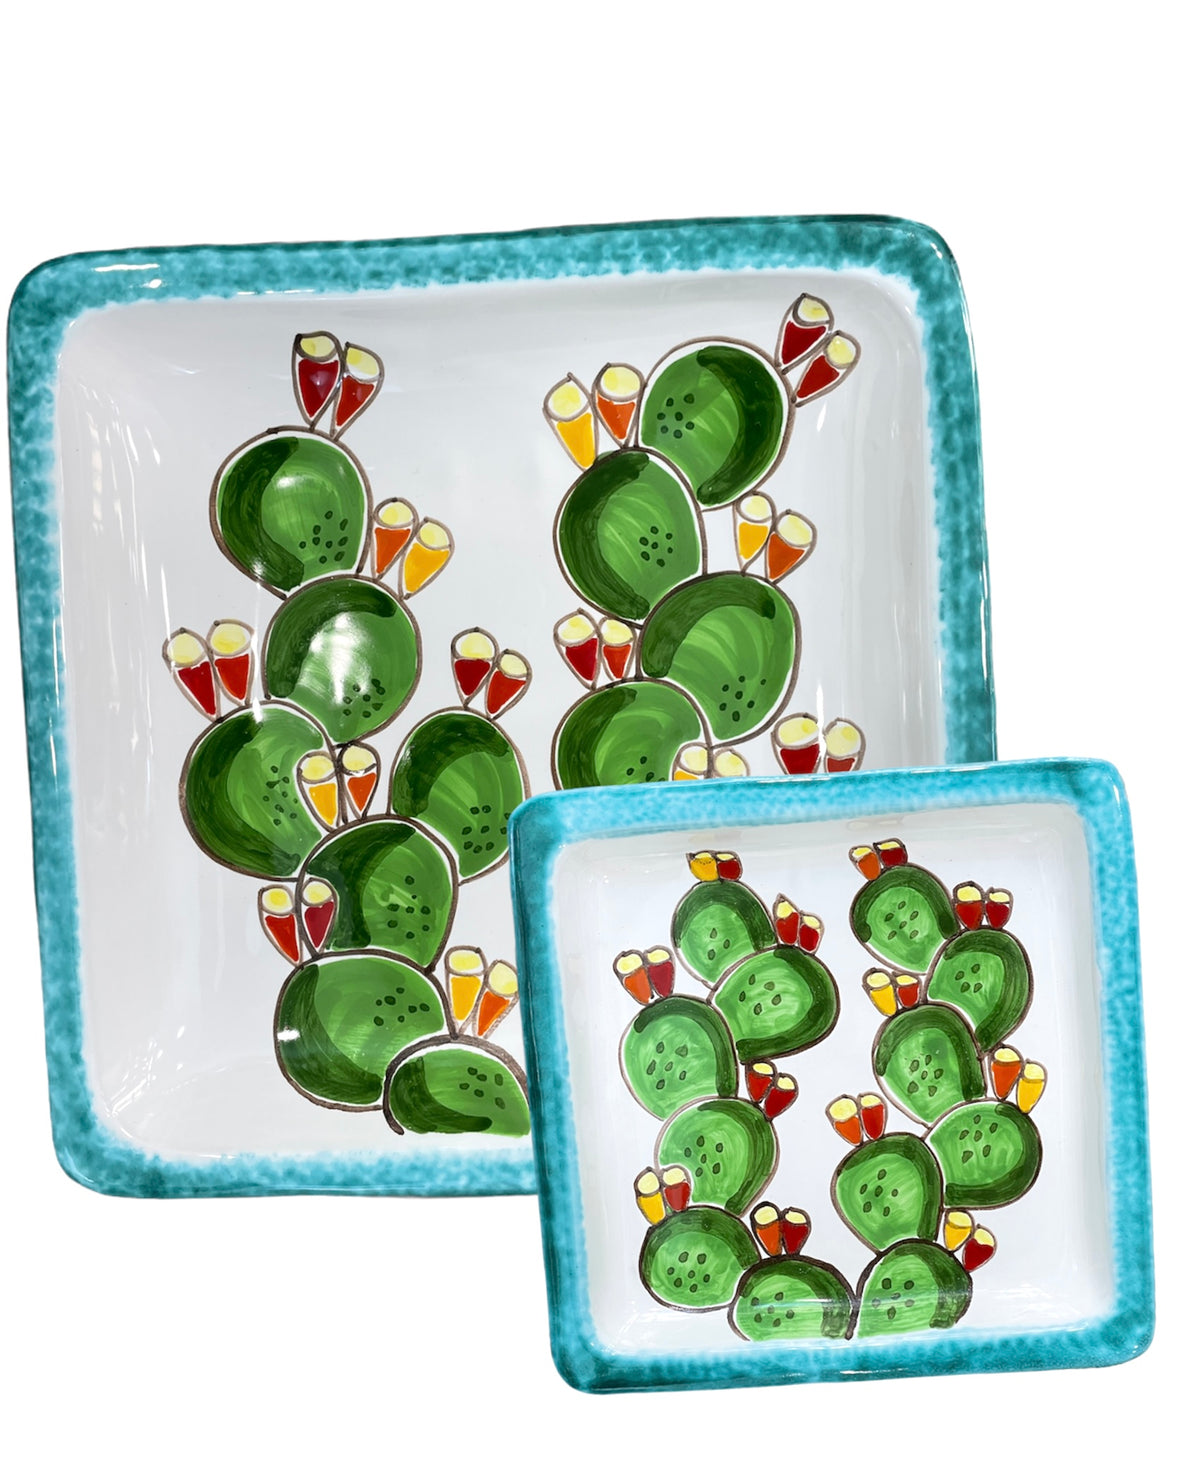 Square Plate Green Edge Prickly Pears